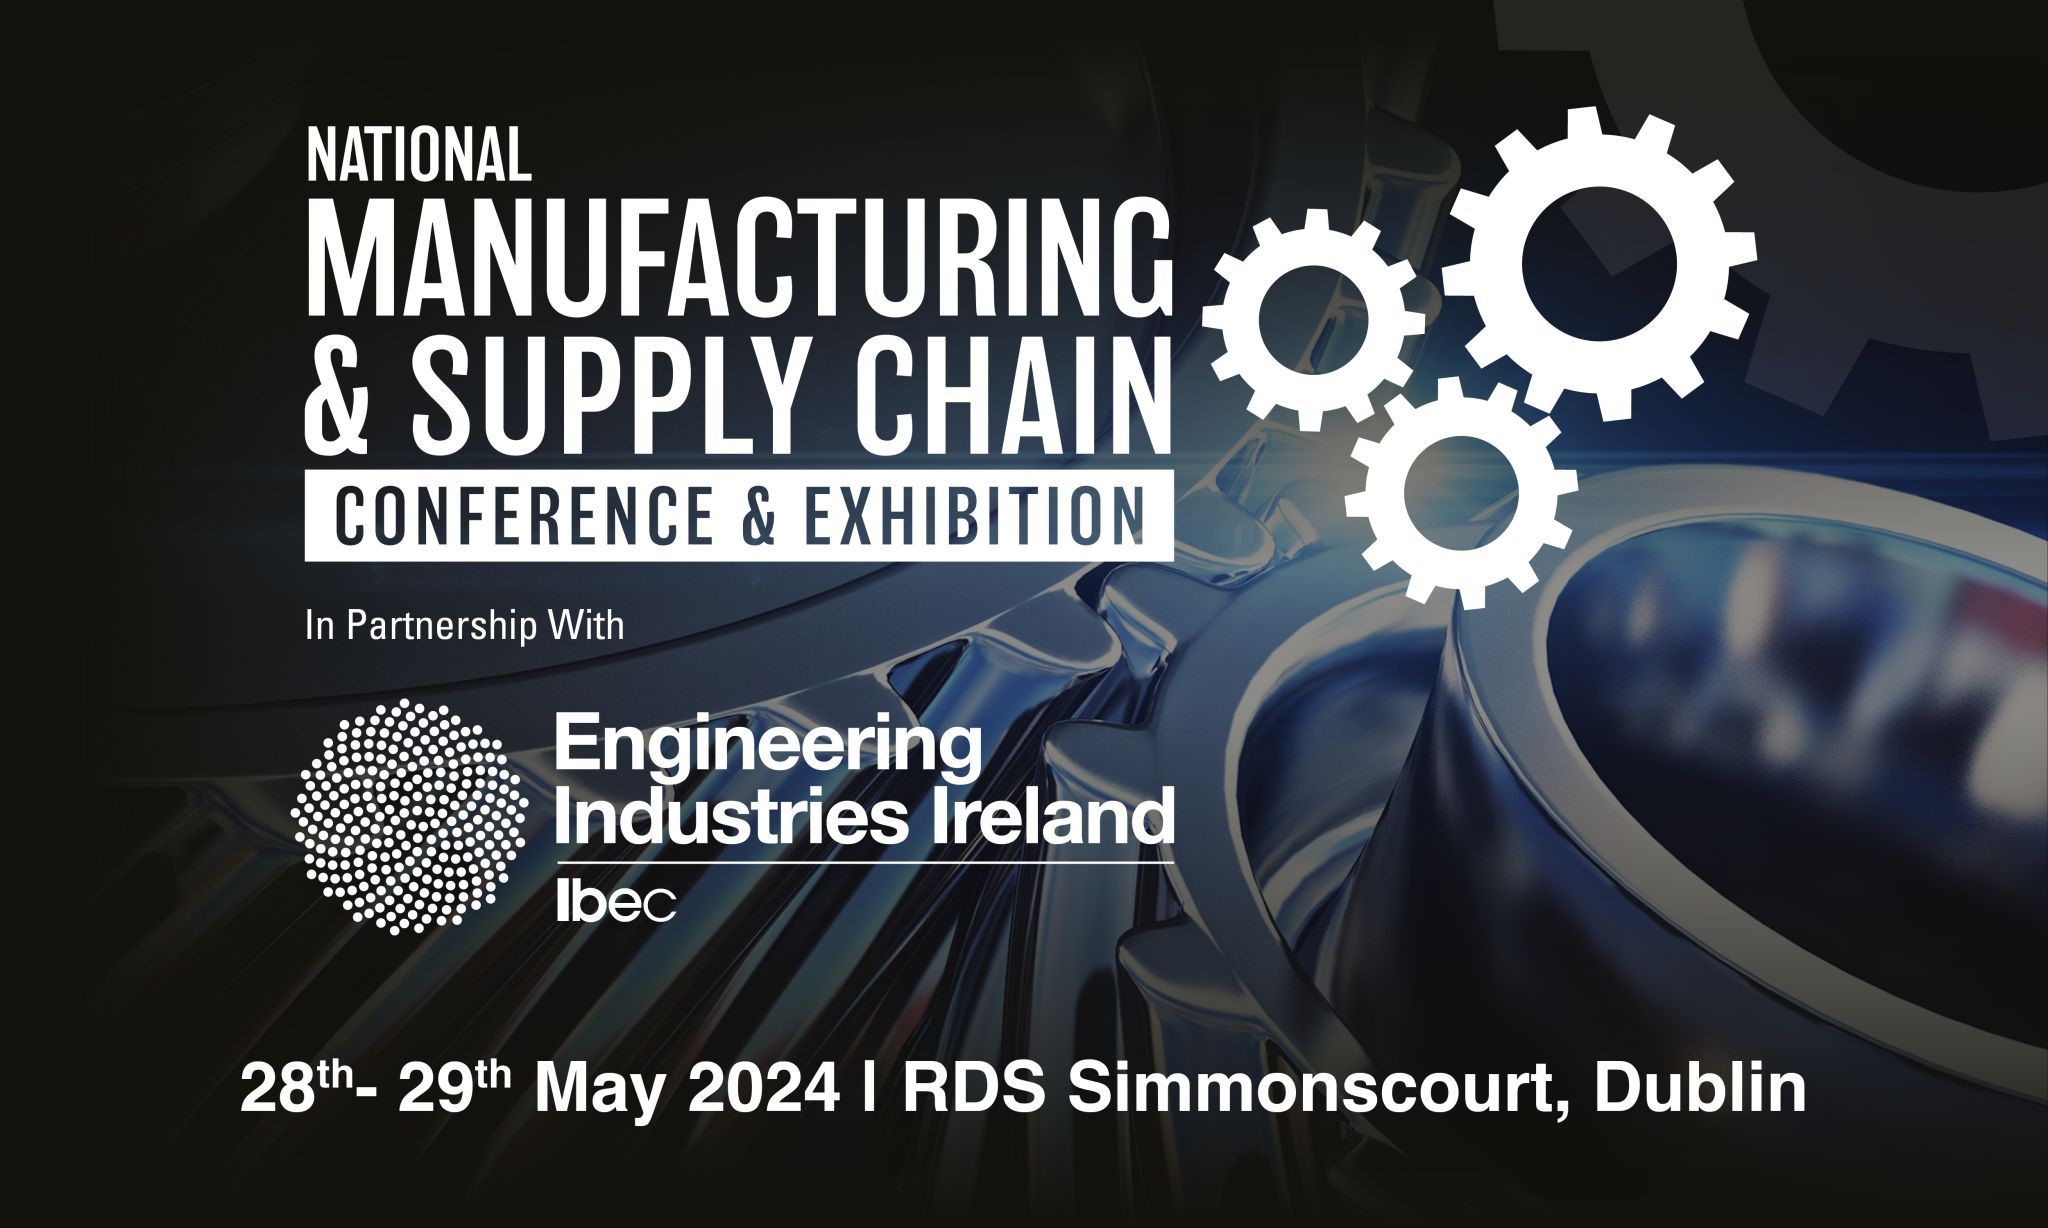 9th National Manufacturing & Supply Chain Conference and Exhibition